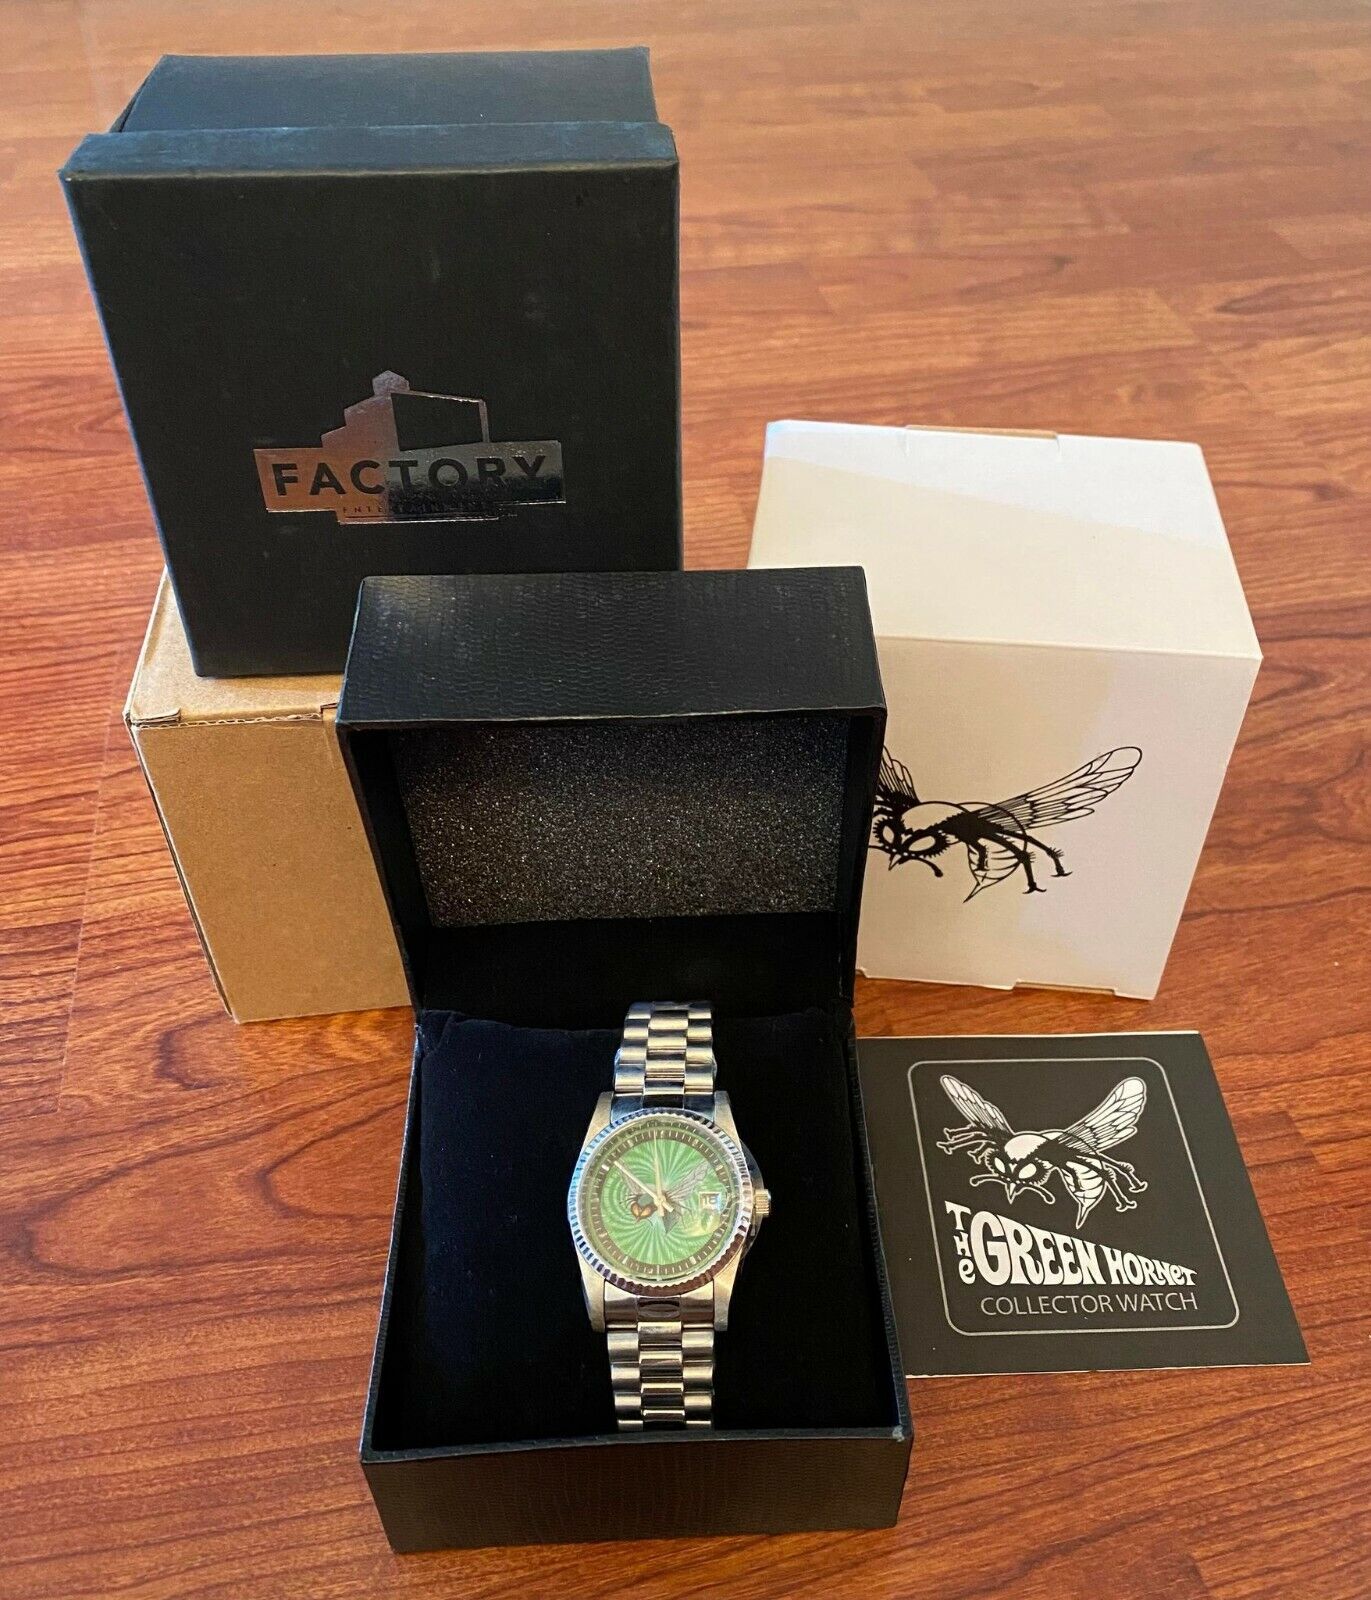 GREEN HORNET COLLECTOR WATCH #_ _ _OF 300 - FACTORY ENTERTAINMENT 2011 - NEW